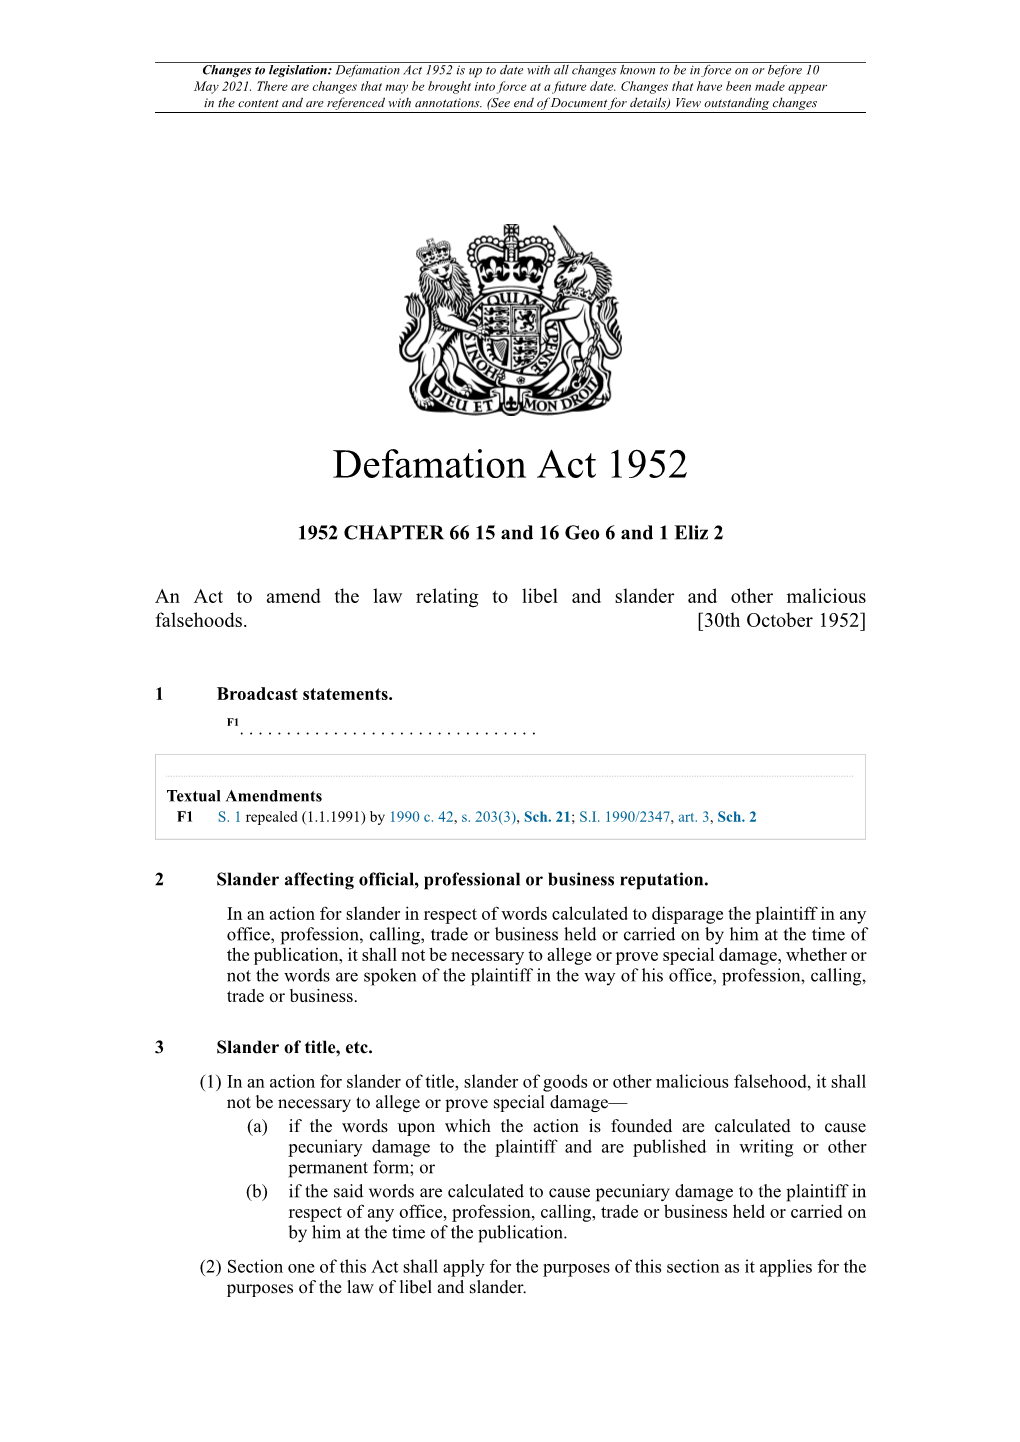 Defamation Act 1952 Is up to Date with All Changes Known to Be in Force on Or Before 10 May 2021